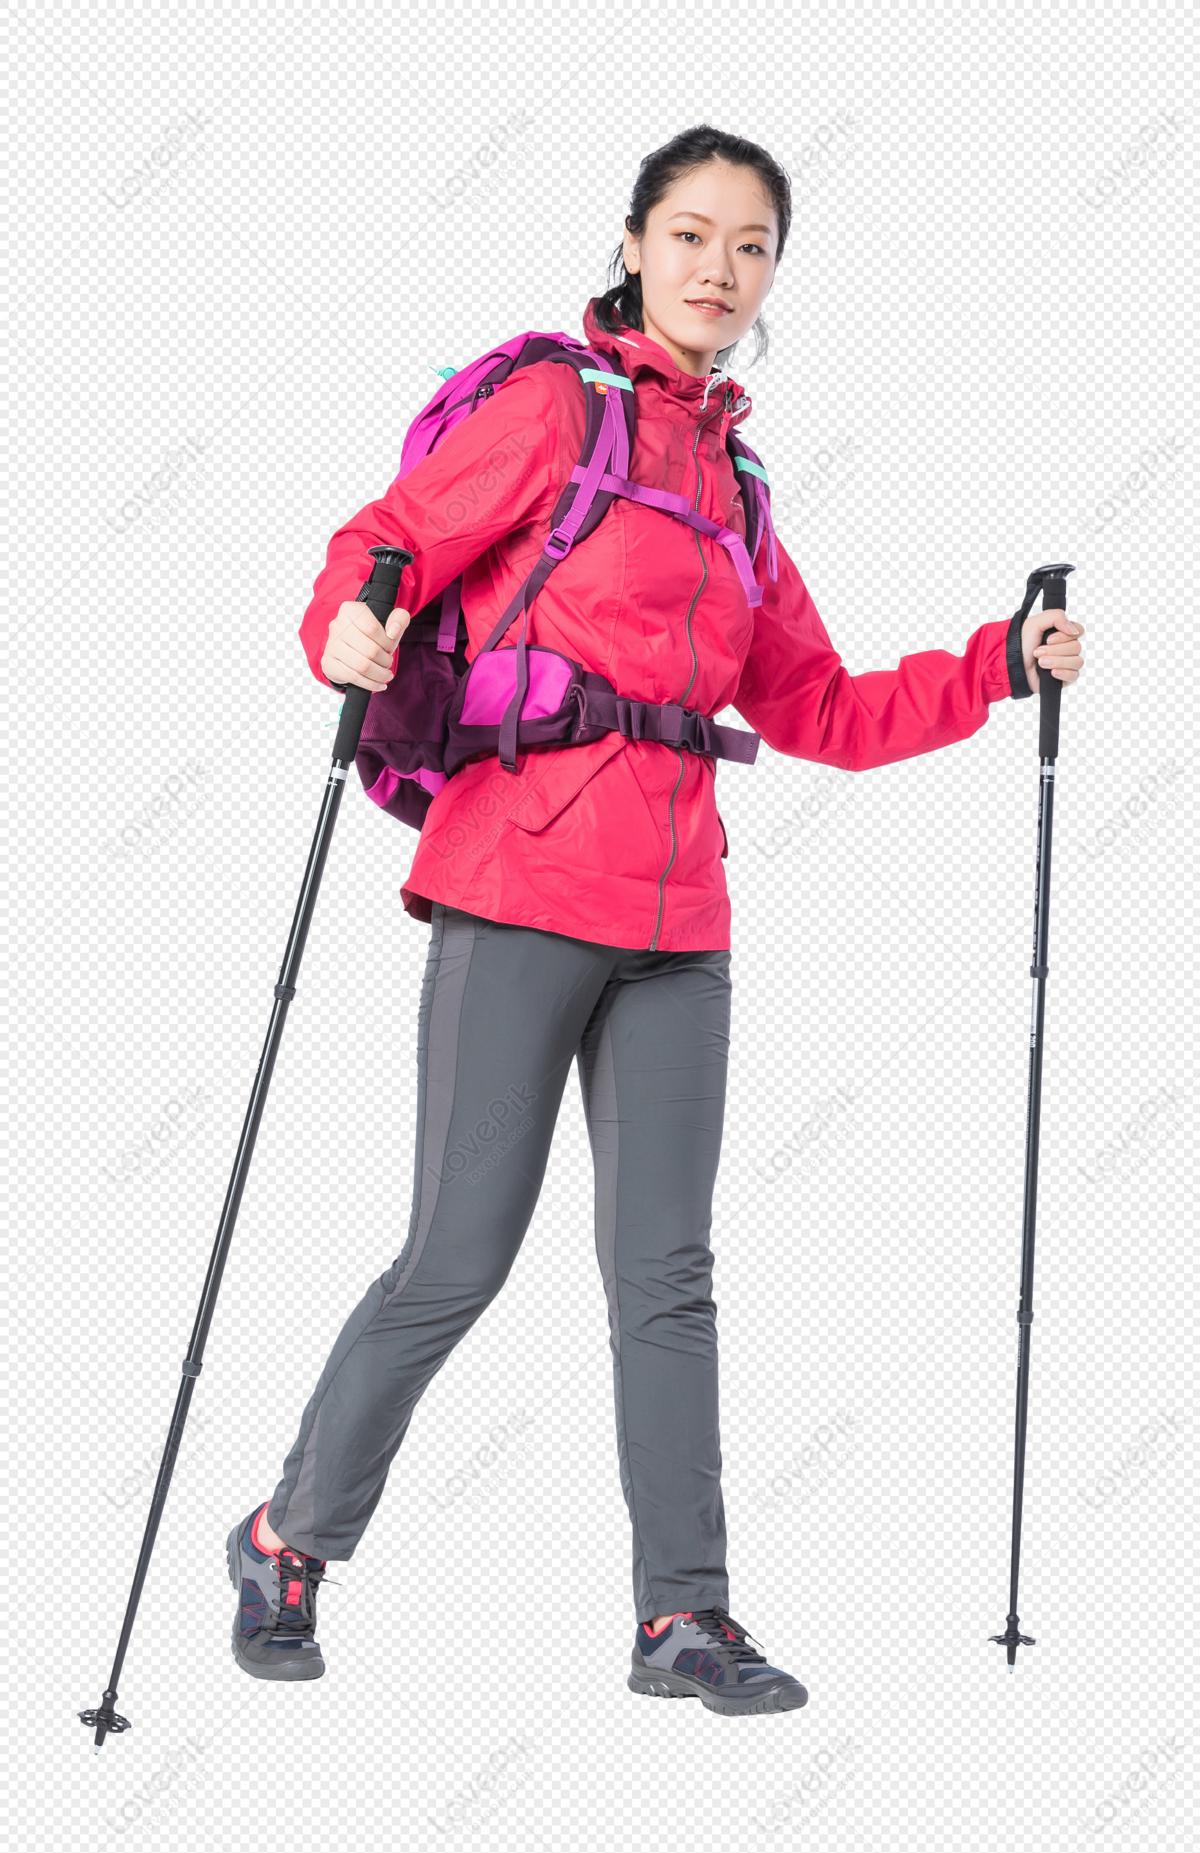 Hiking Young Women PNG Hd Transparent Image And Clipart Image For Free ...